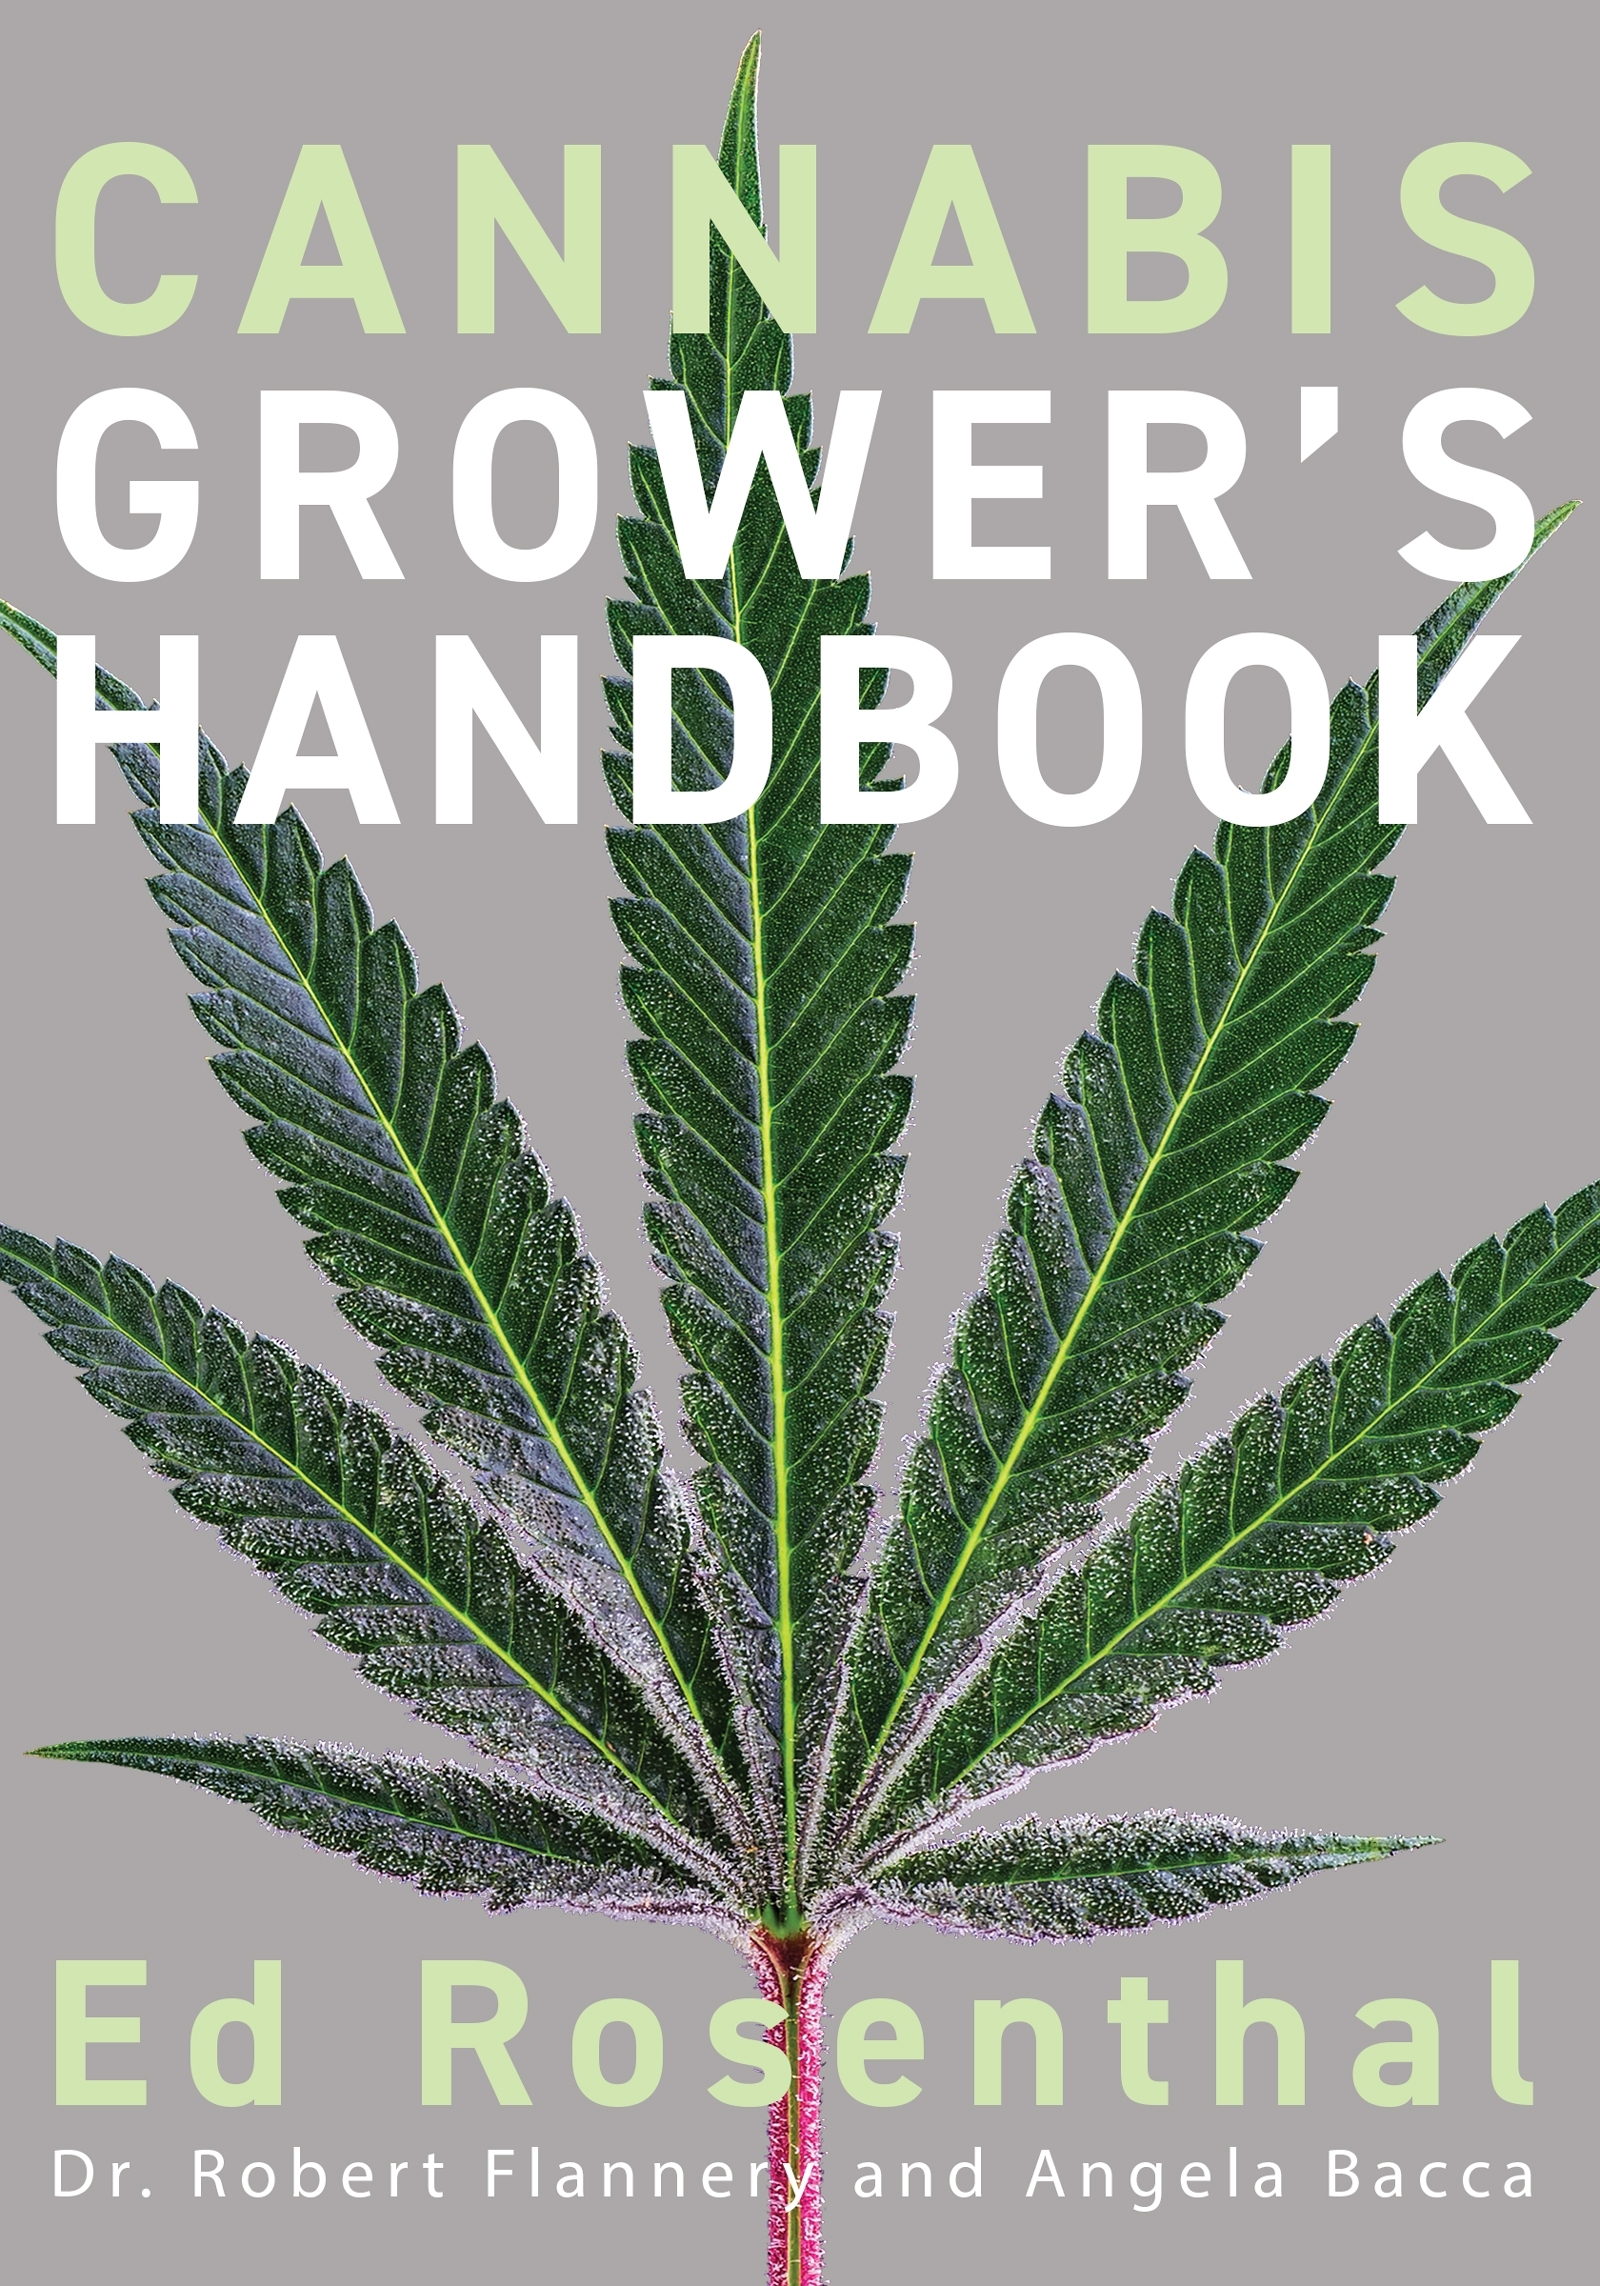 Ed Rosenthal’s definitive book on marijuana cultivation. Rosenthal has been at the forefront of the legalization effort as well as documenting the best growing and processing methods.